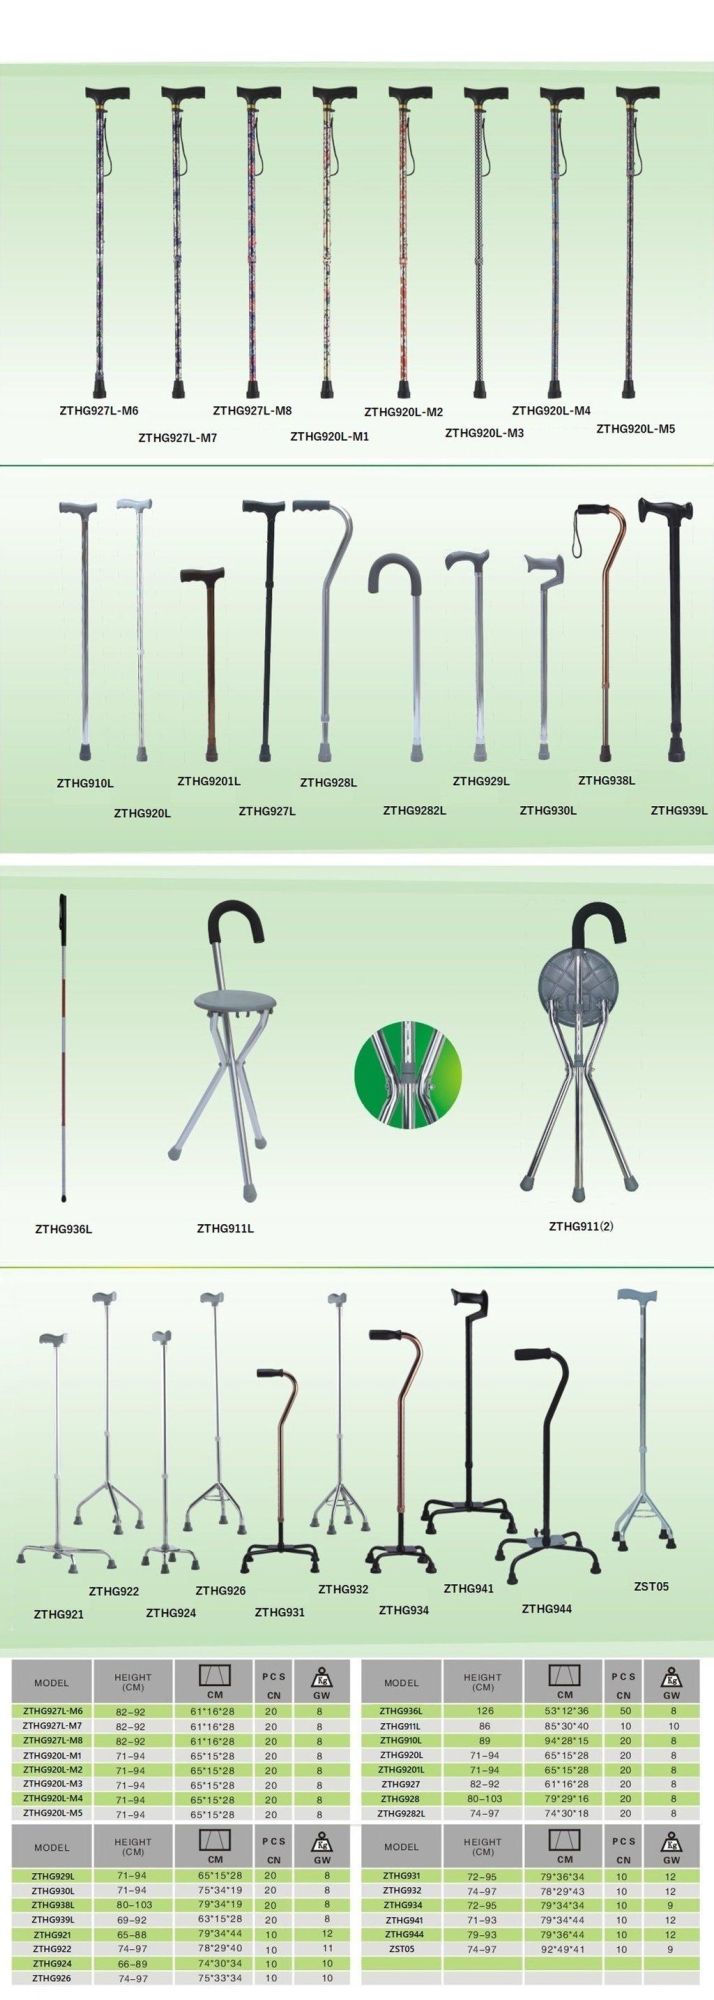 Multicolor Lightweight Disabled People and Elderly People Outdoor Use Home Care Walking Stick Aluminum T-Shape Non-Slip Hand Grip and Non-Slip Foot Crutch